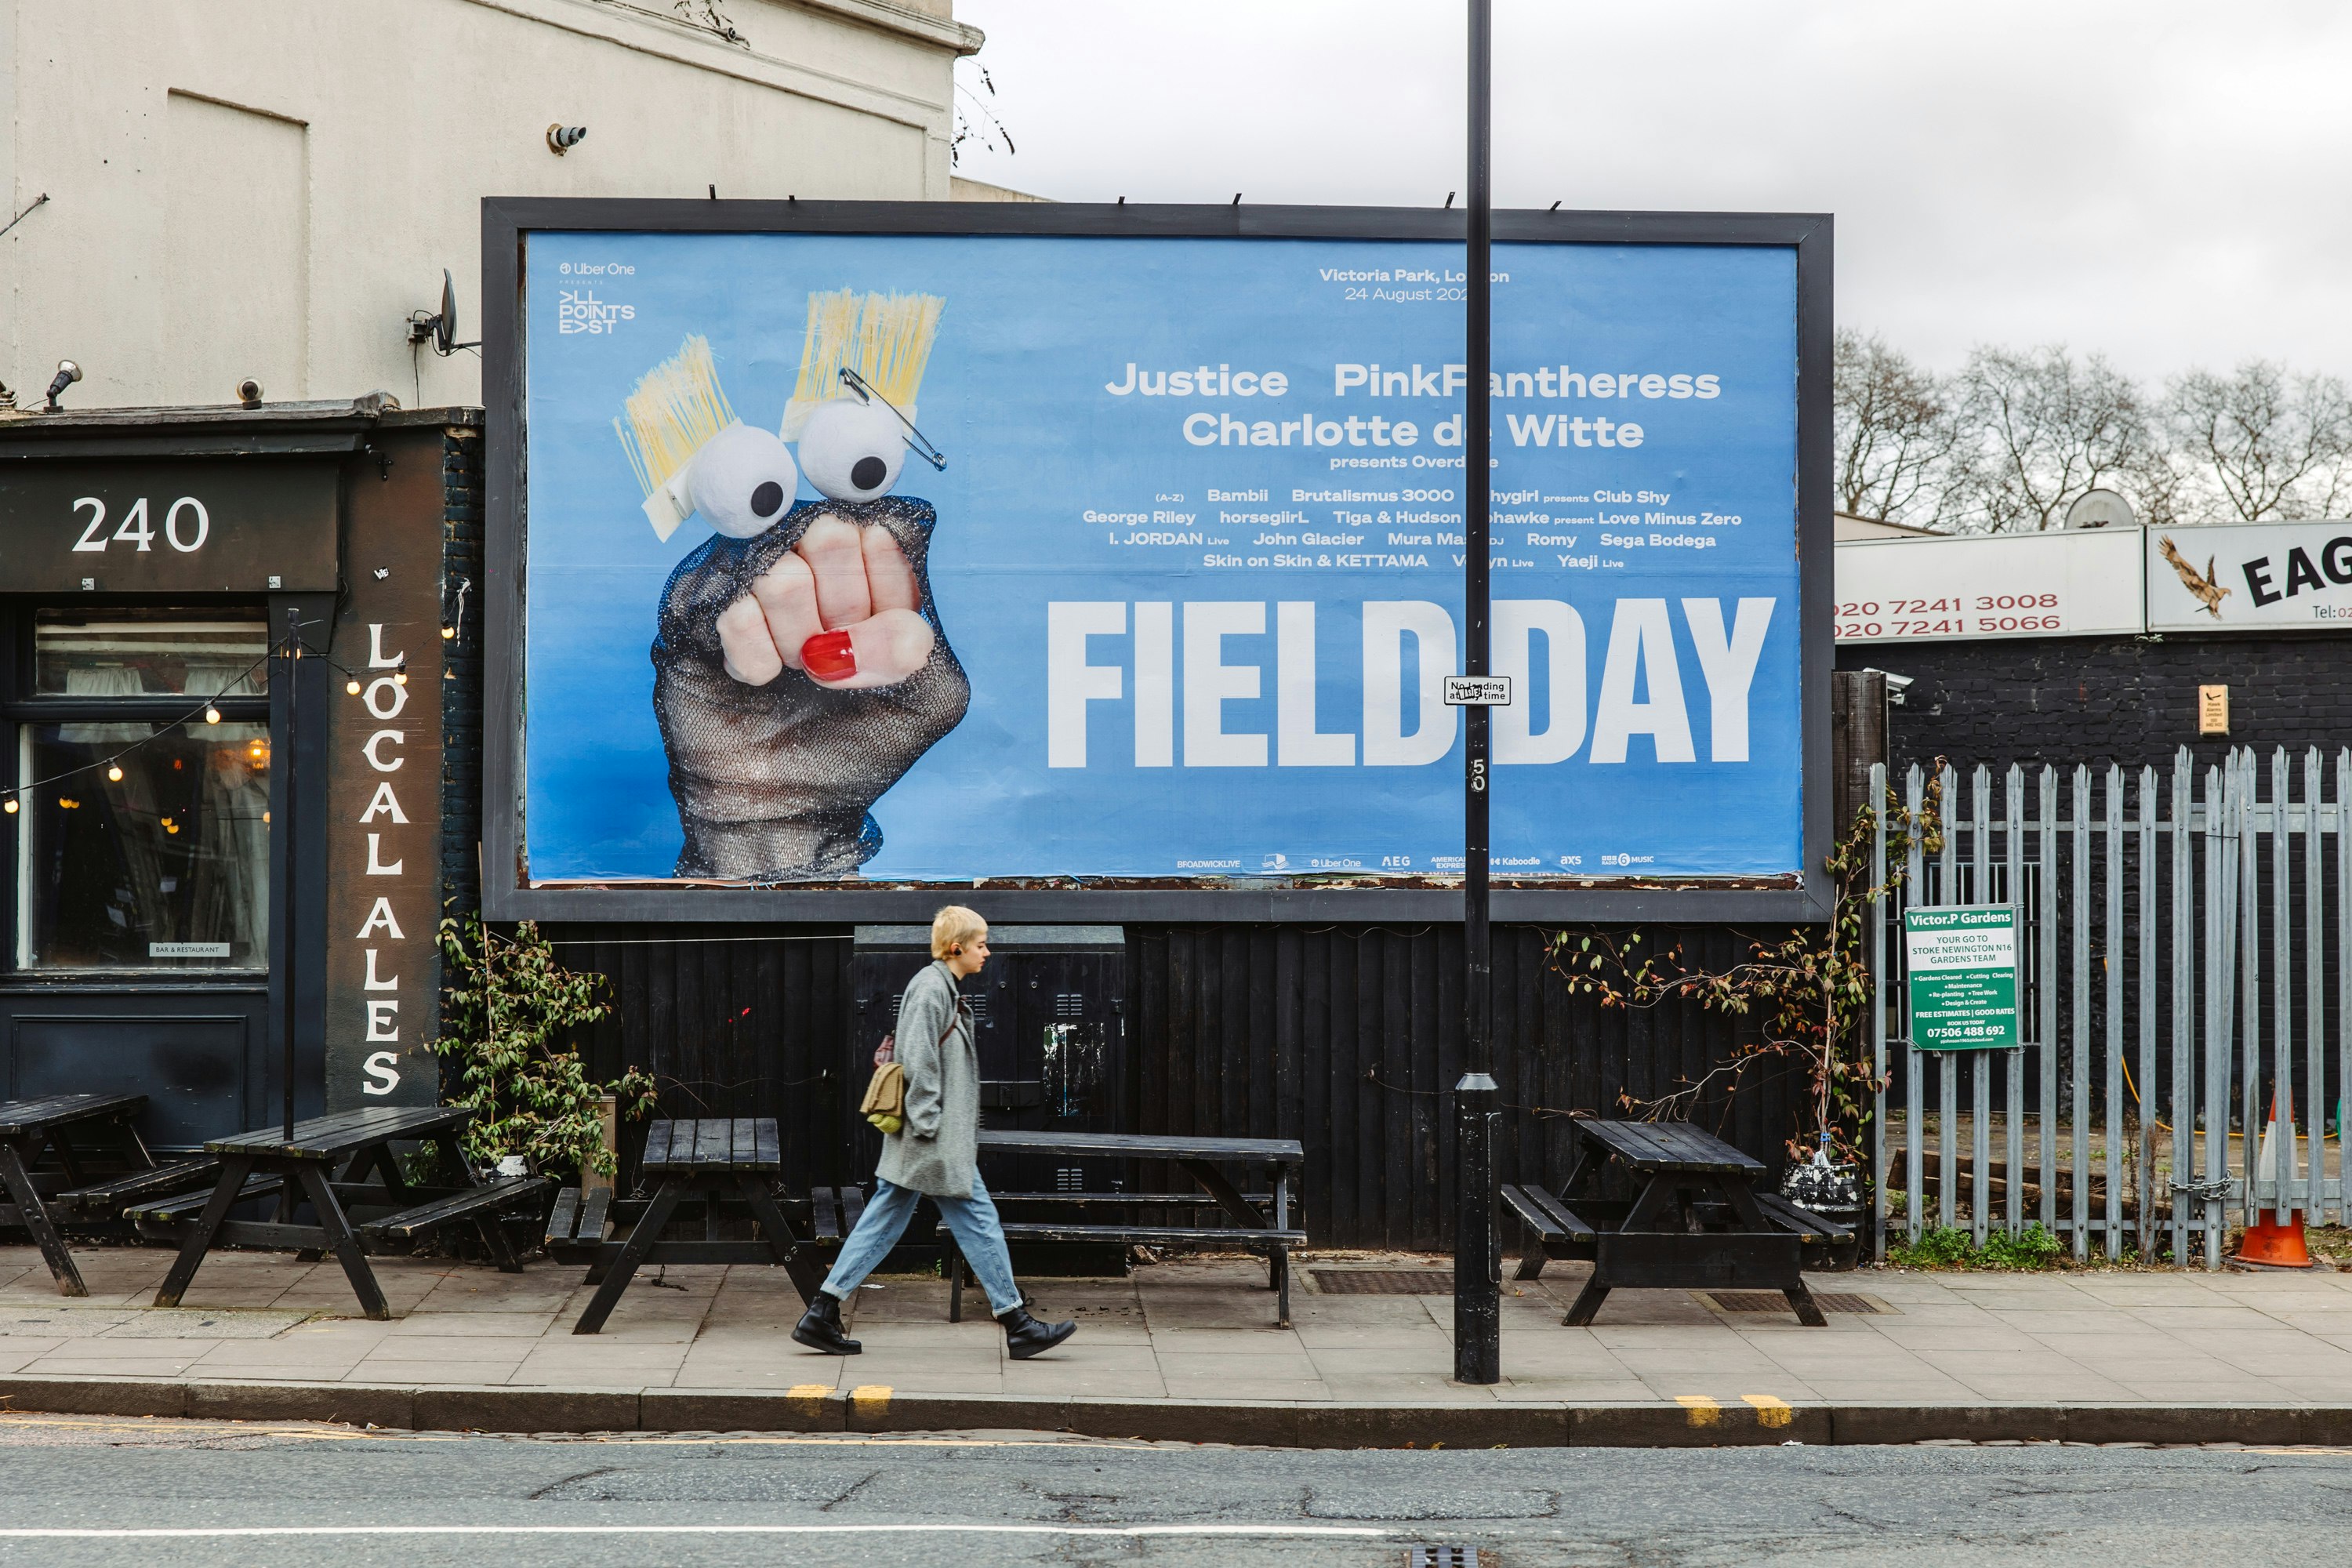 A large billboard advertising Field Day, featuring a sheer puppet on a blue background.